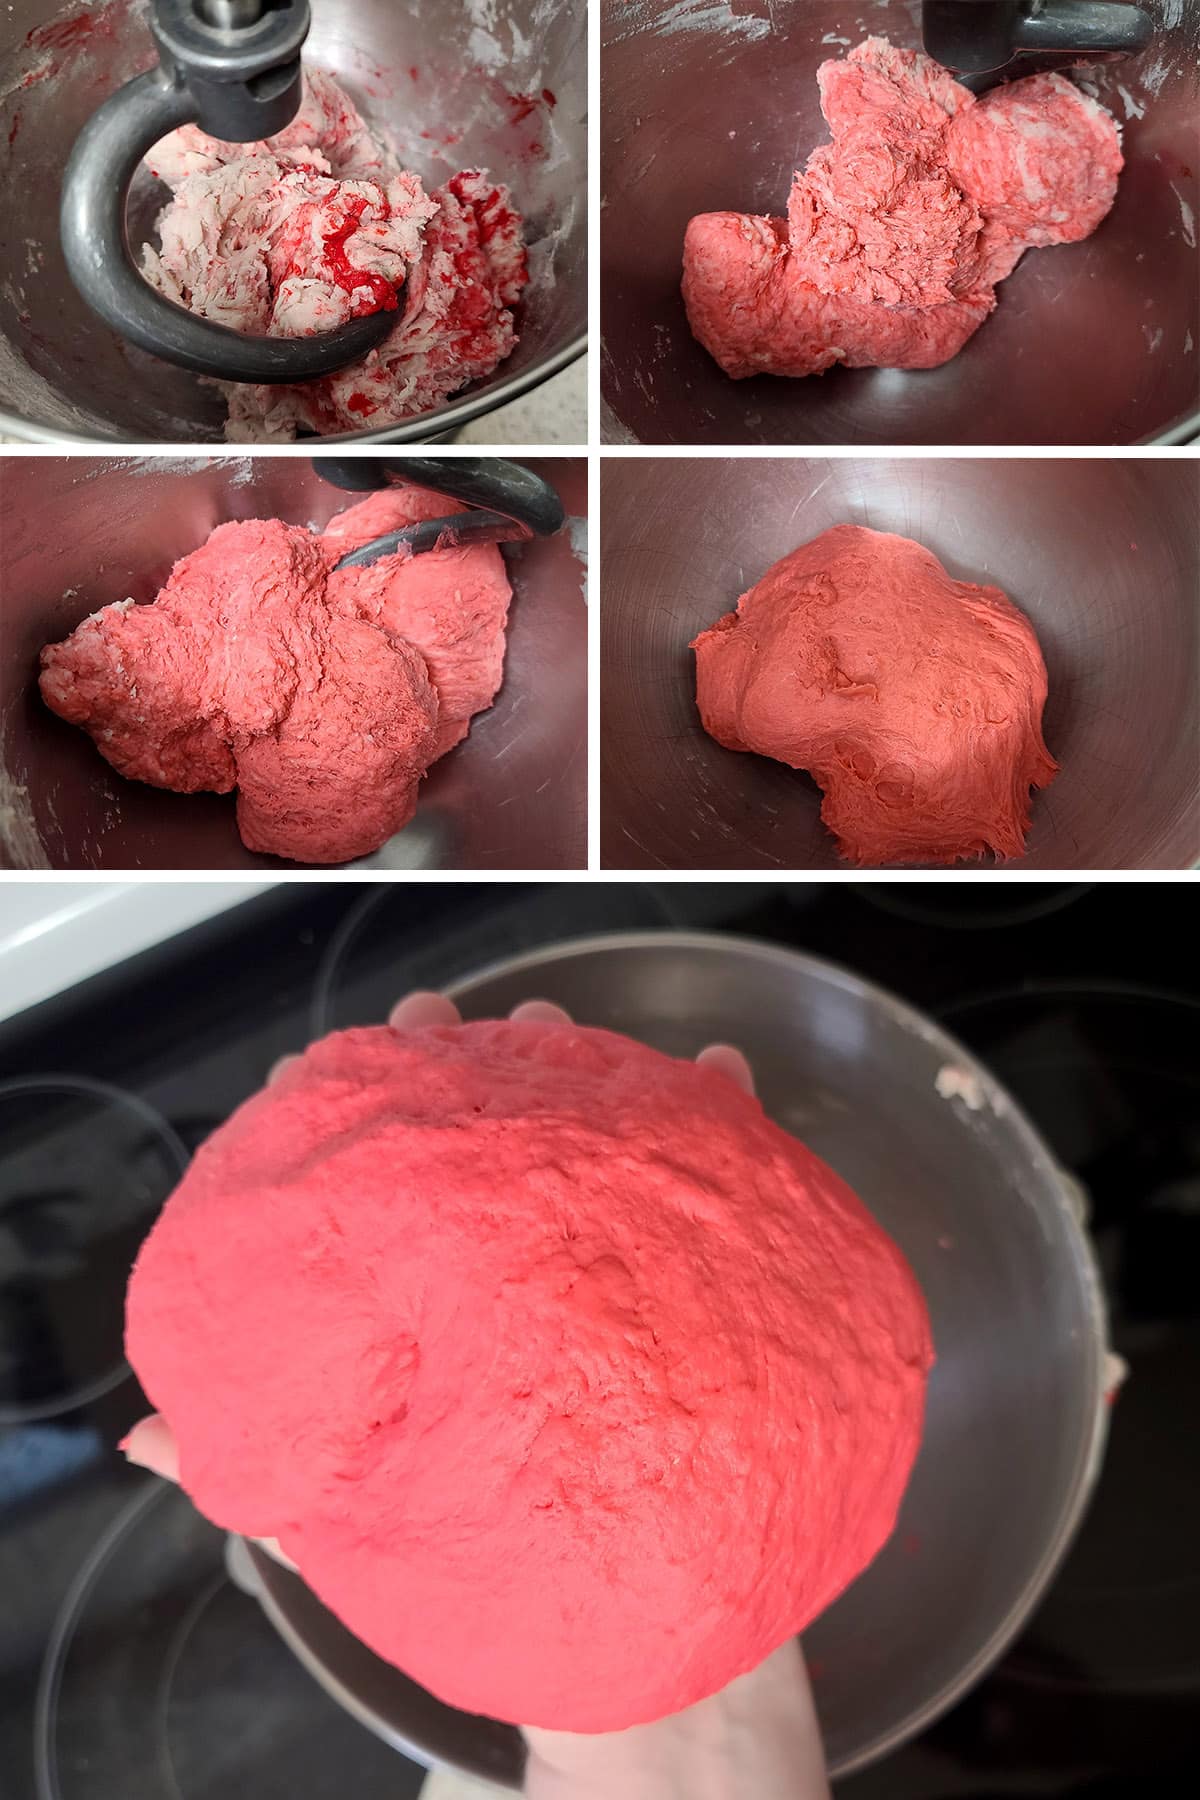 A 5 part image showing the pink bagel dough being mixed in a mixer, from shaggy to smooth.